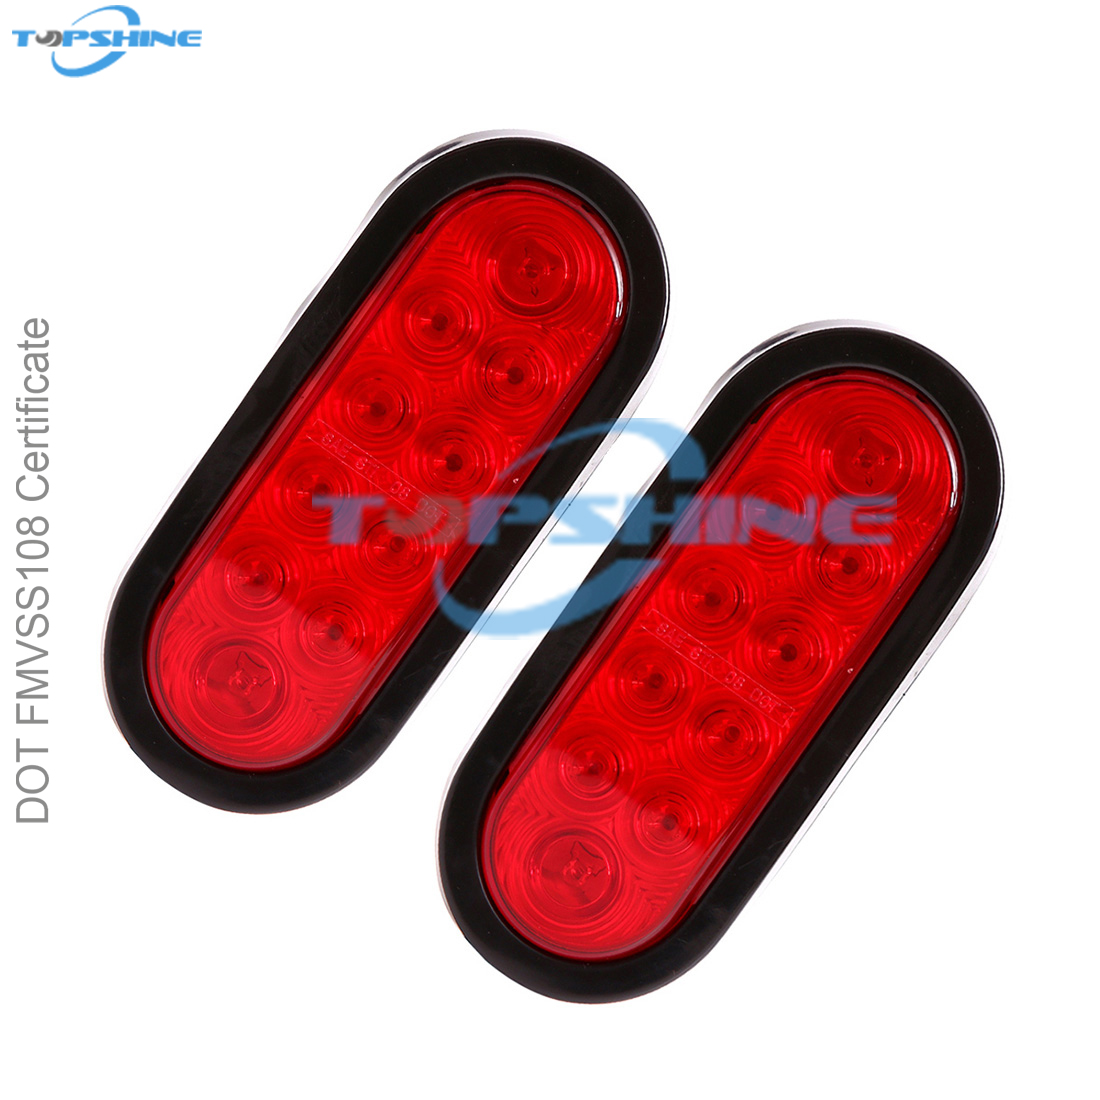 101012PR 6 Inch Waterproof Oval LED Trailer Lights Stop Turn Signal Tail Brake Lights Featured Image